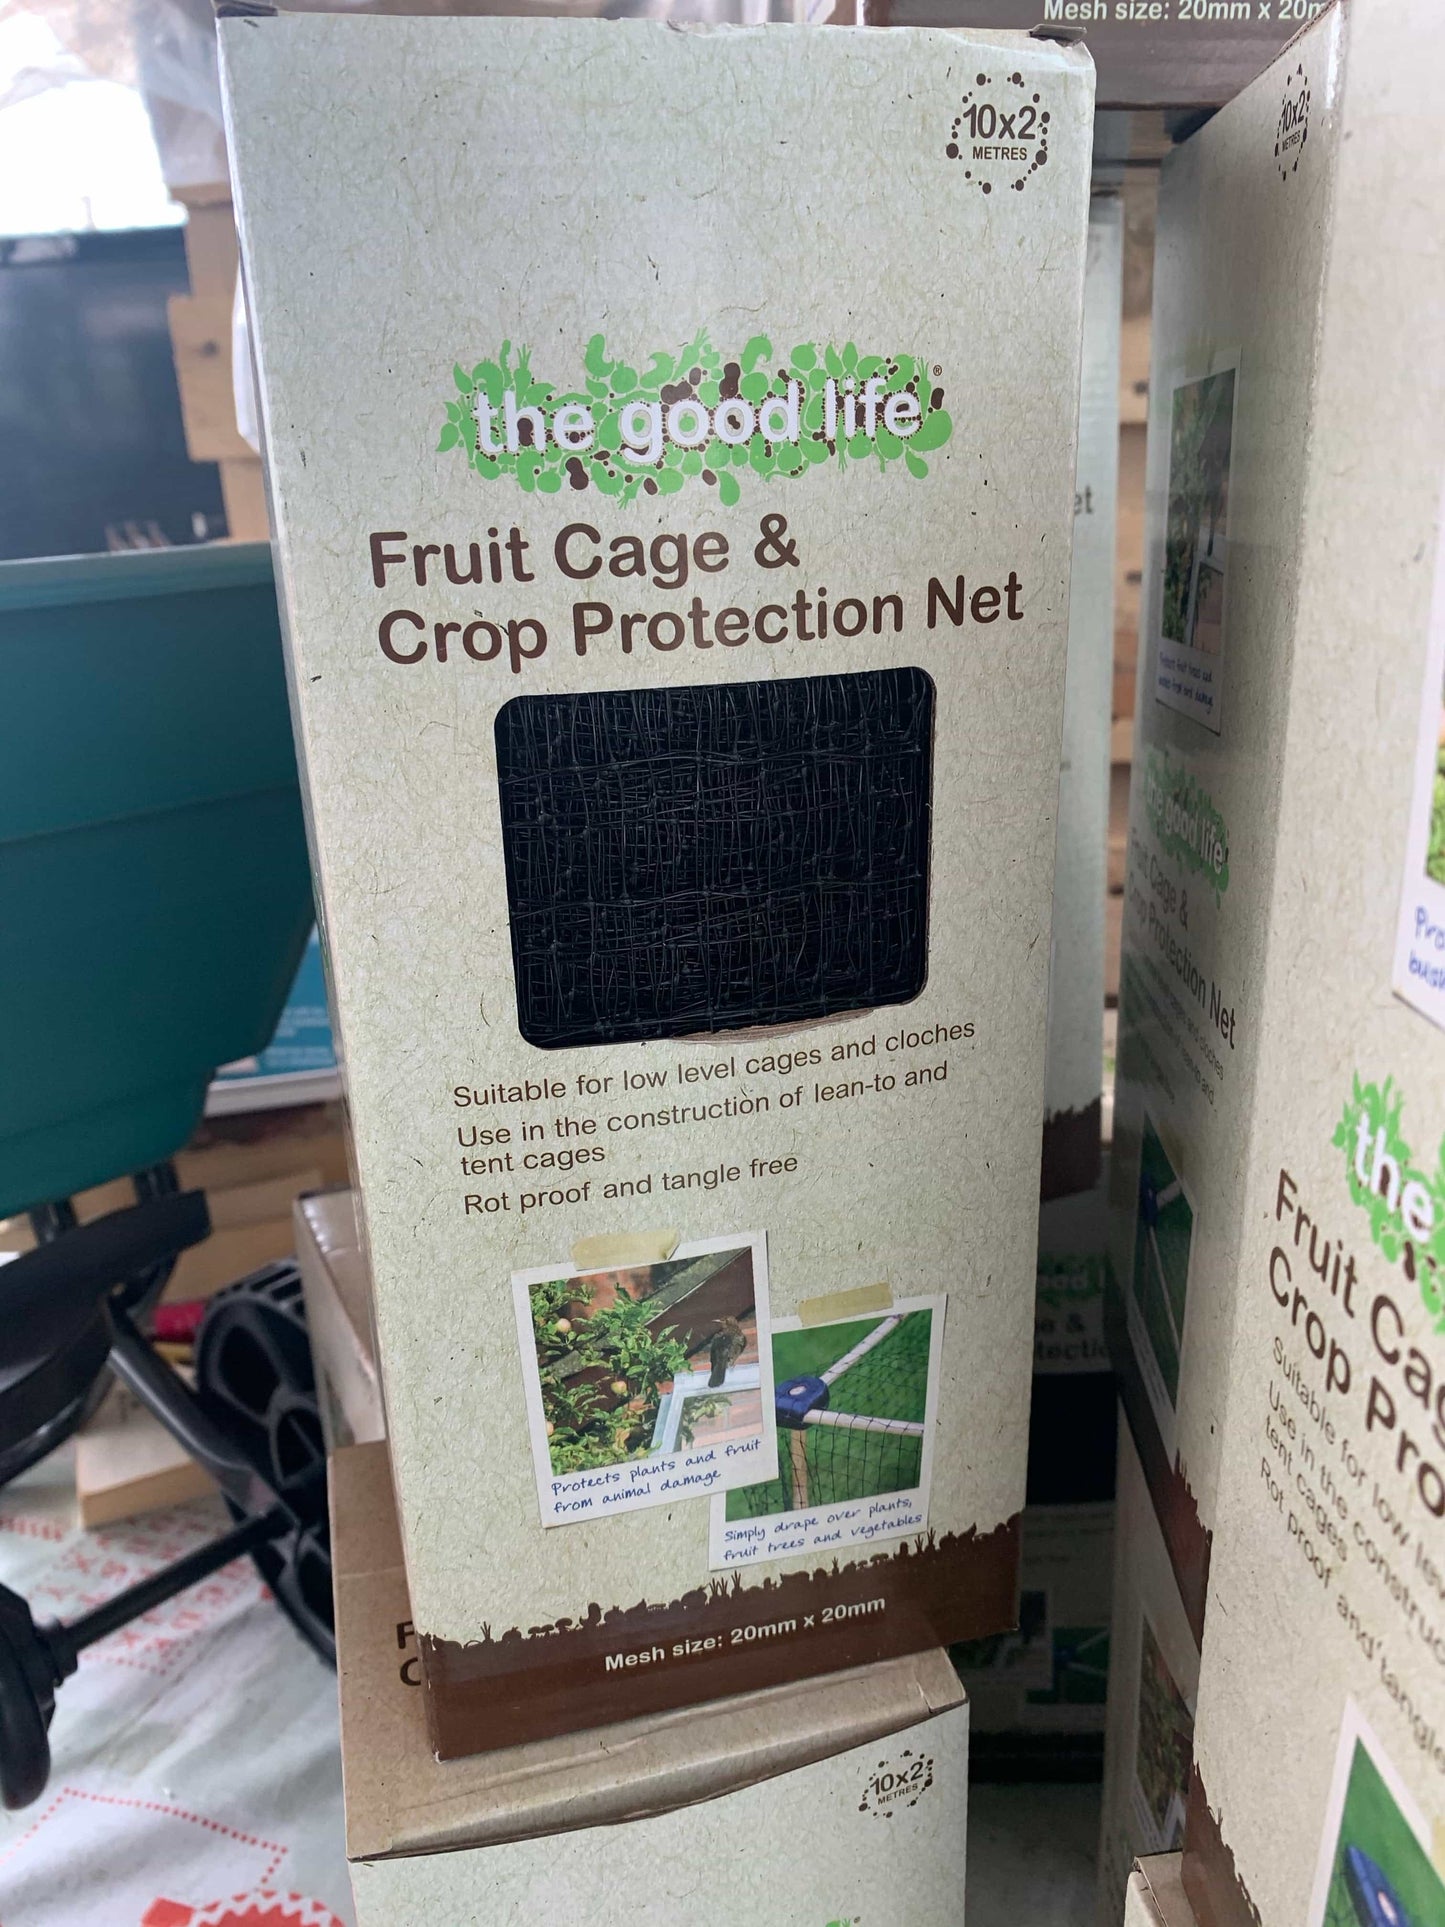 Fruit Cage & Crop protection net